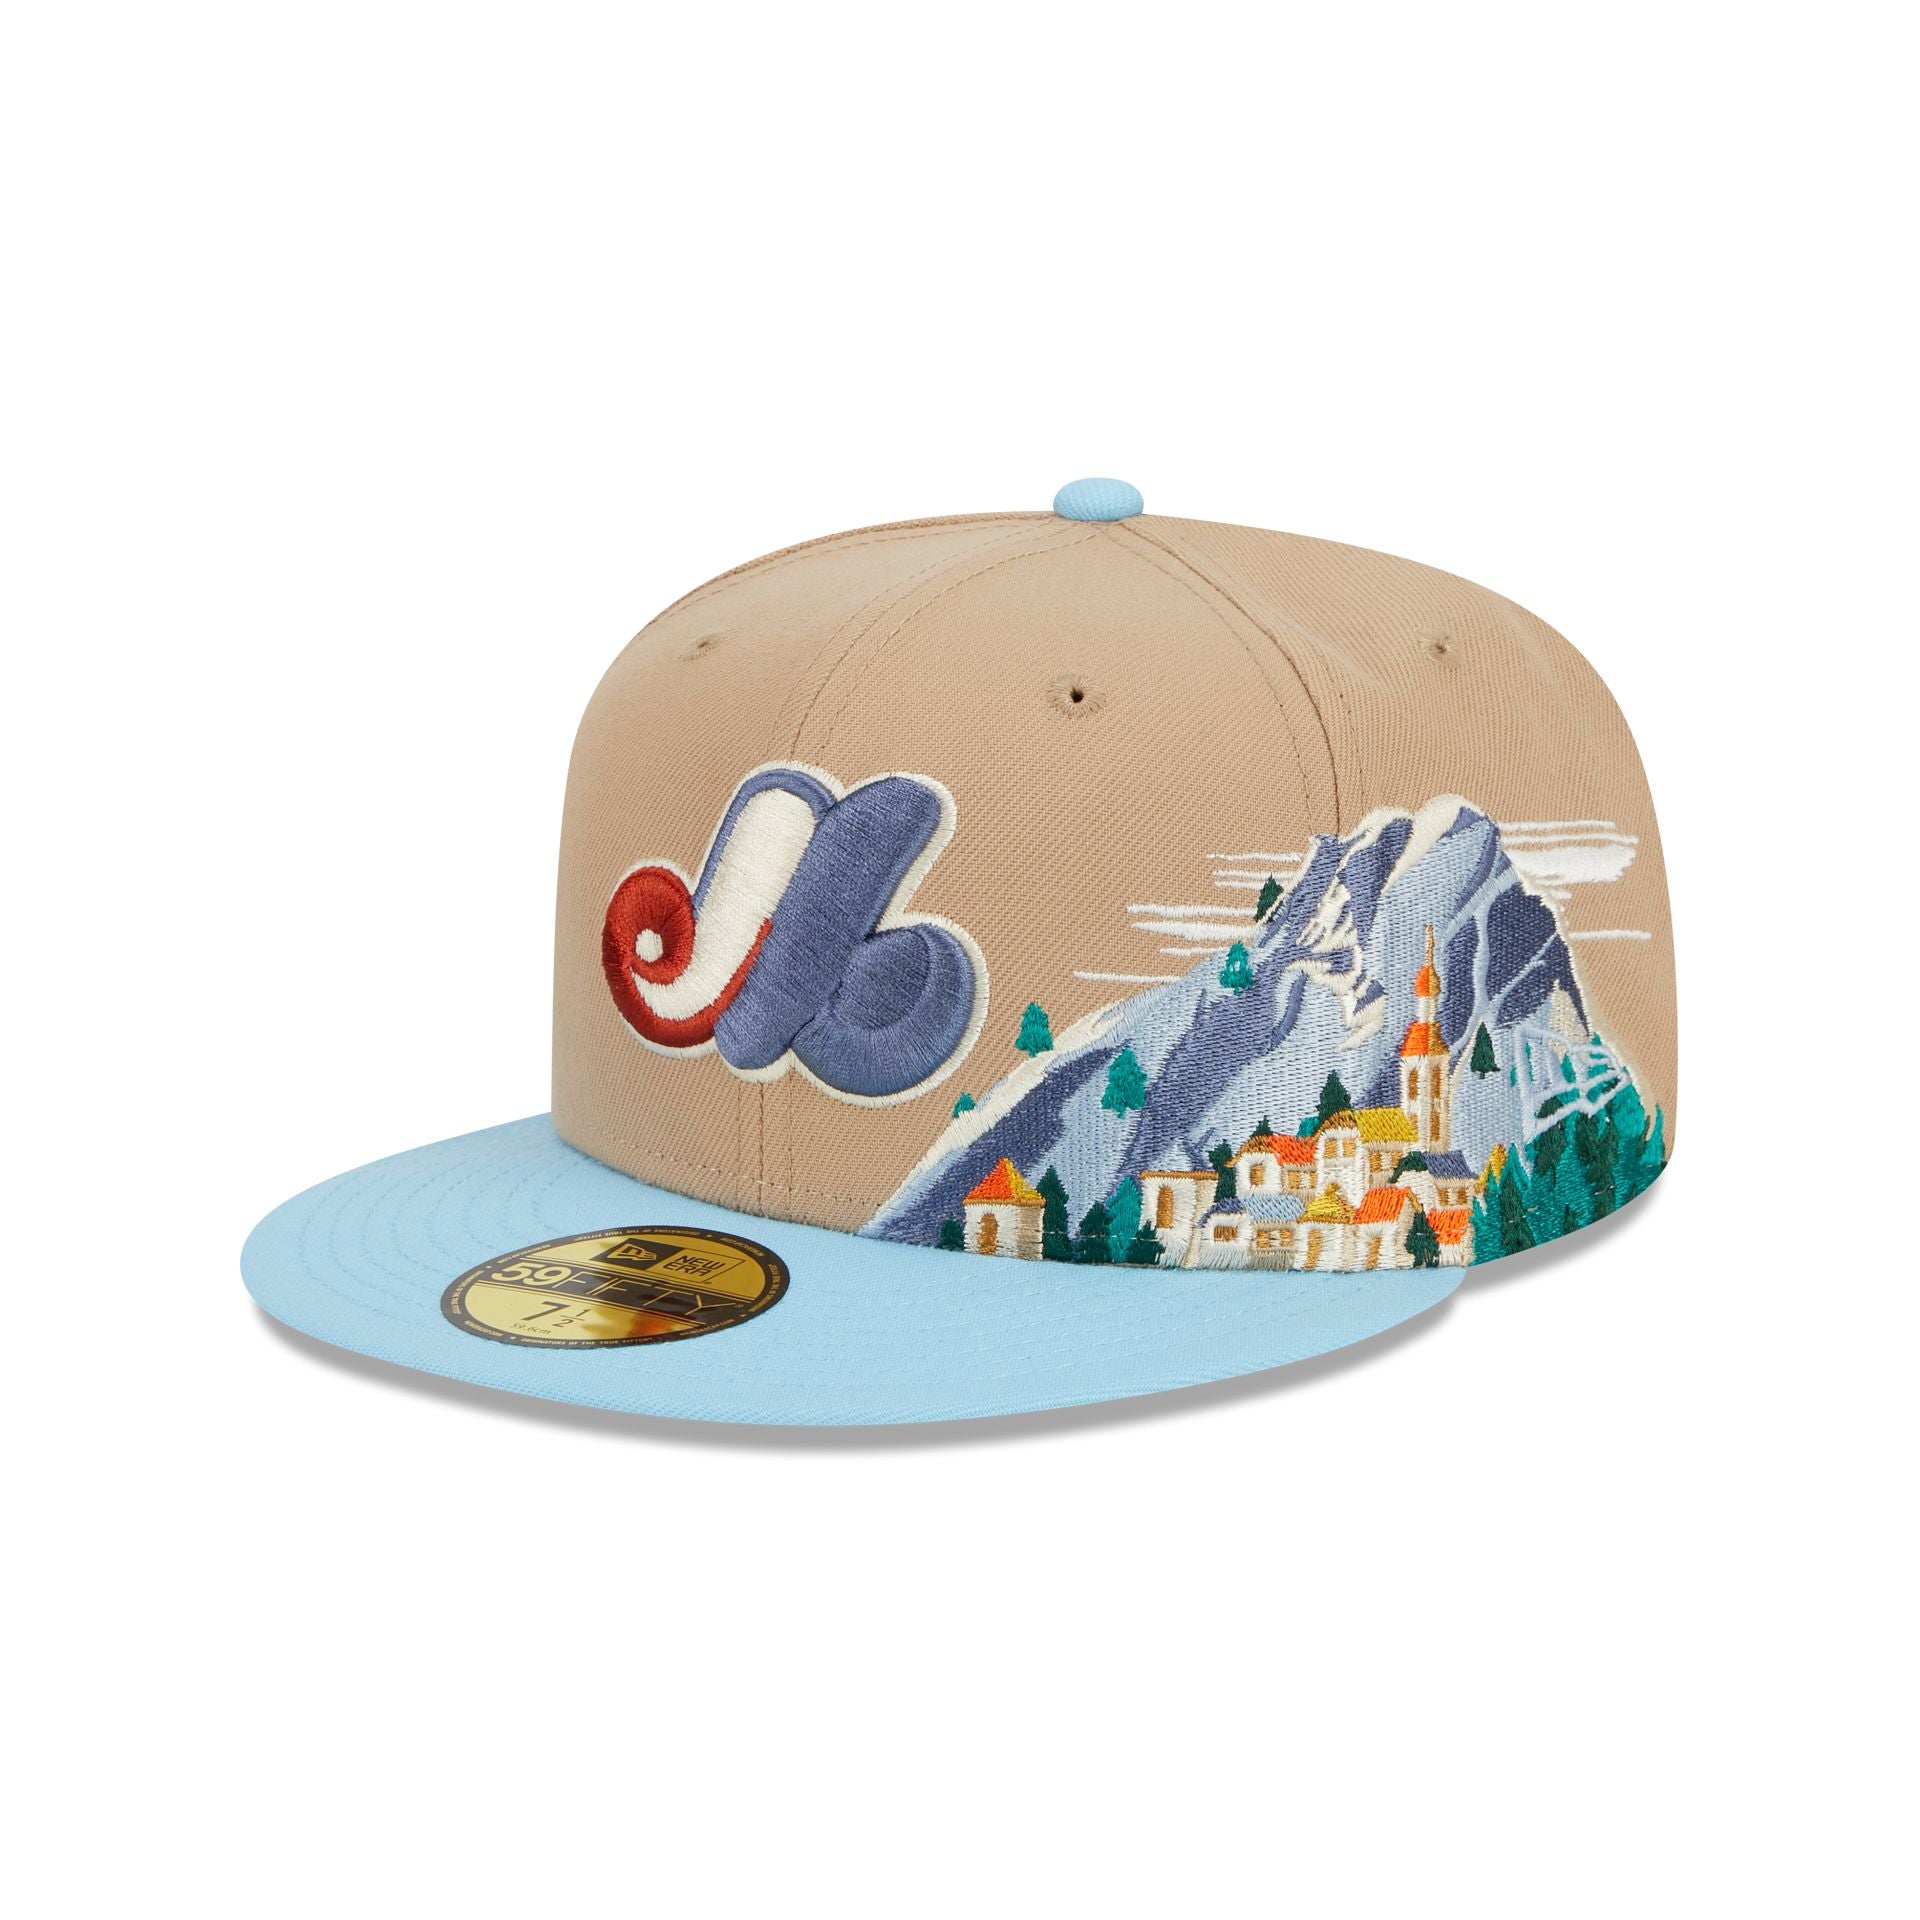 Montreal Expos Snowcapped 59FIFTY Fitted Hat – New Era Cap